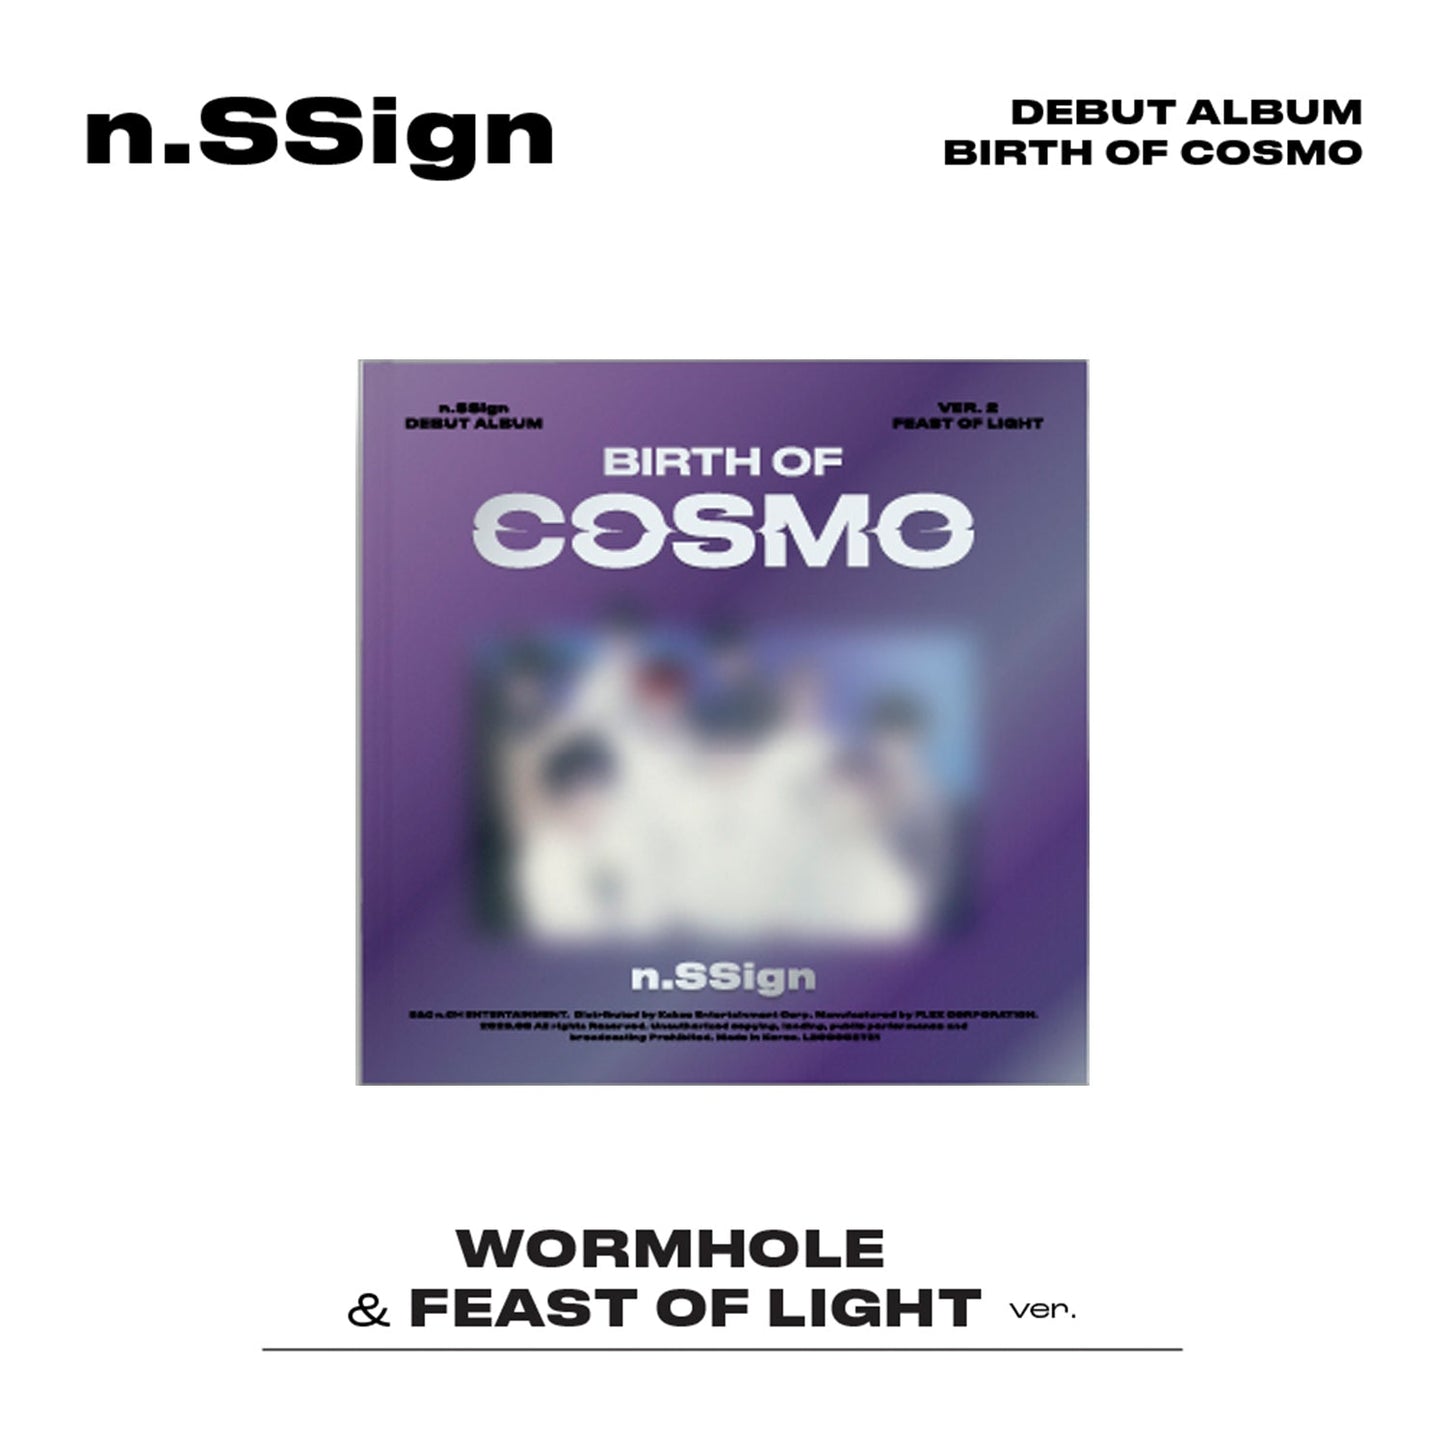 N.SSIGN DEBUT ALBUM 'BIRTH OF COSMO' FEAST OF LIGHT VERSION COVER